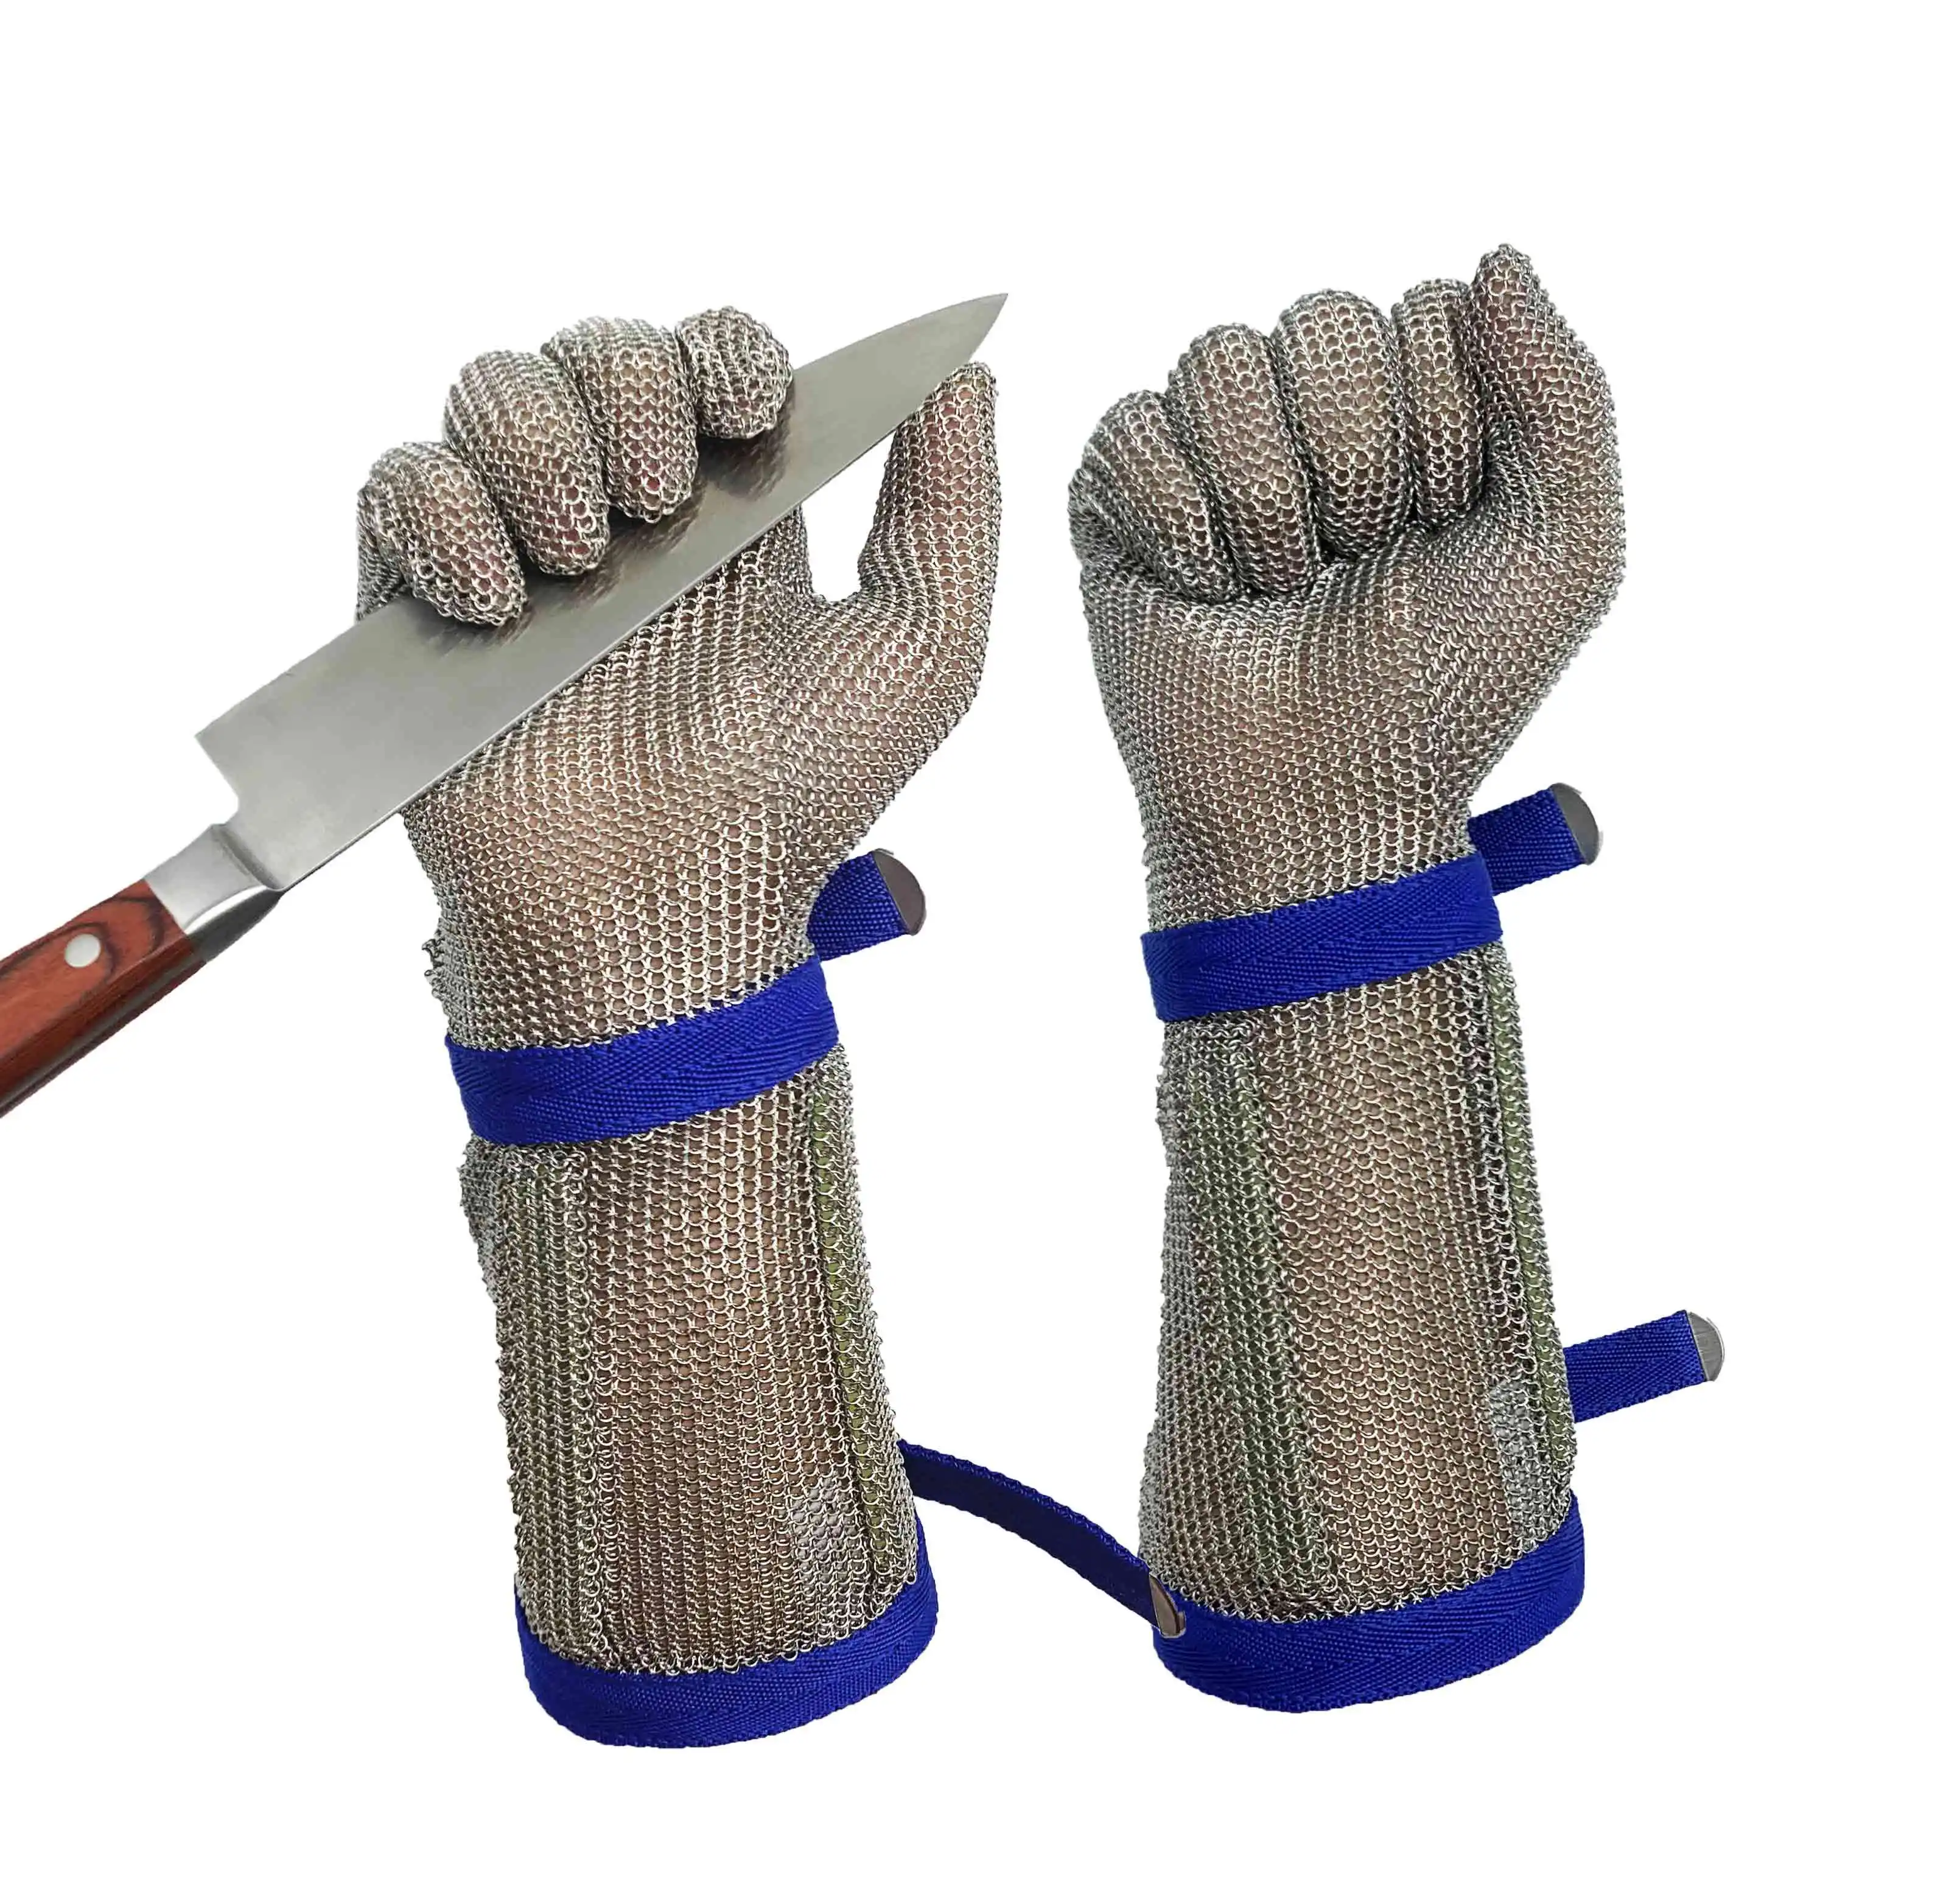 Metal Gloves, Butcher Gloves, Stainless Steel Gloves and Chainmail